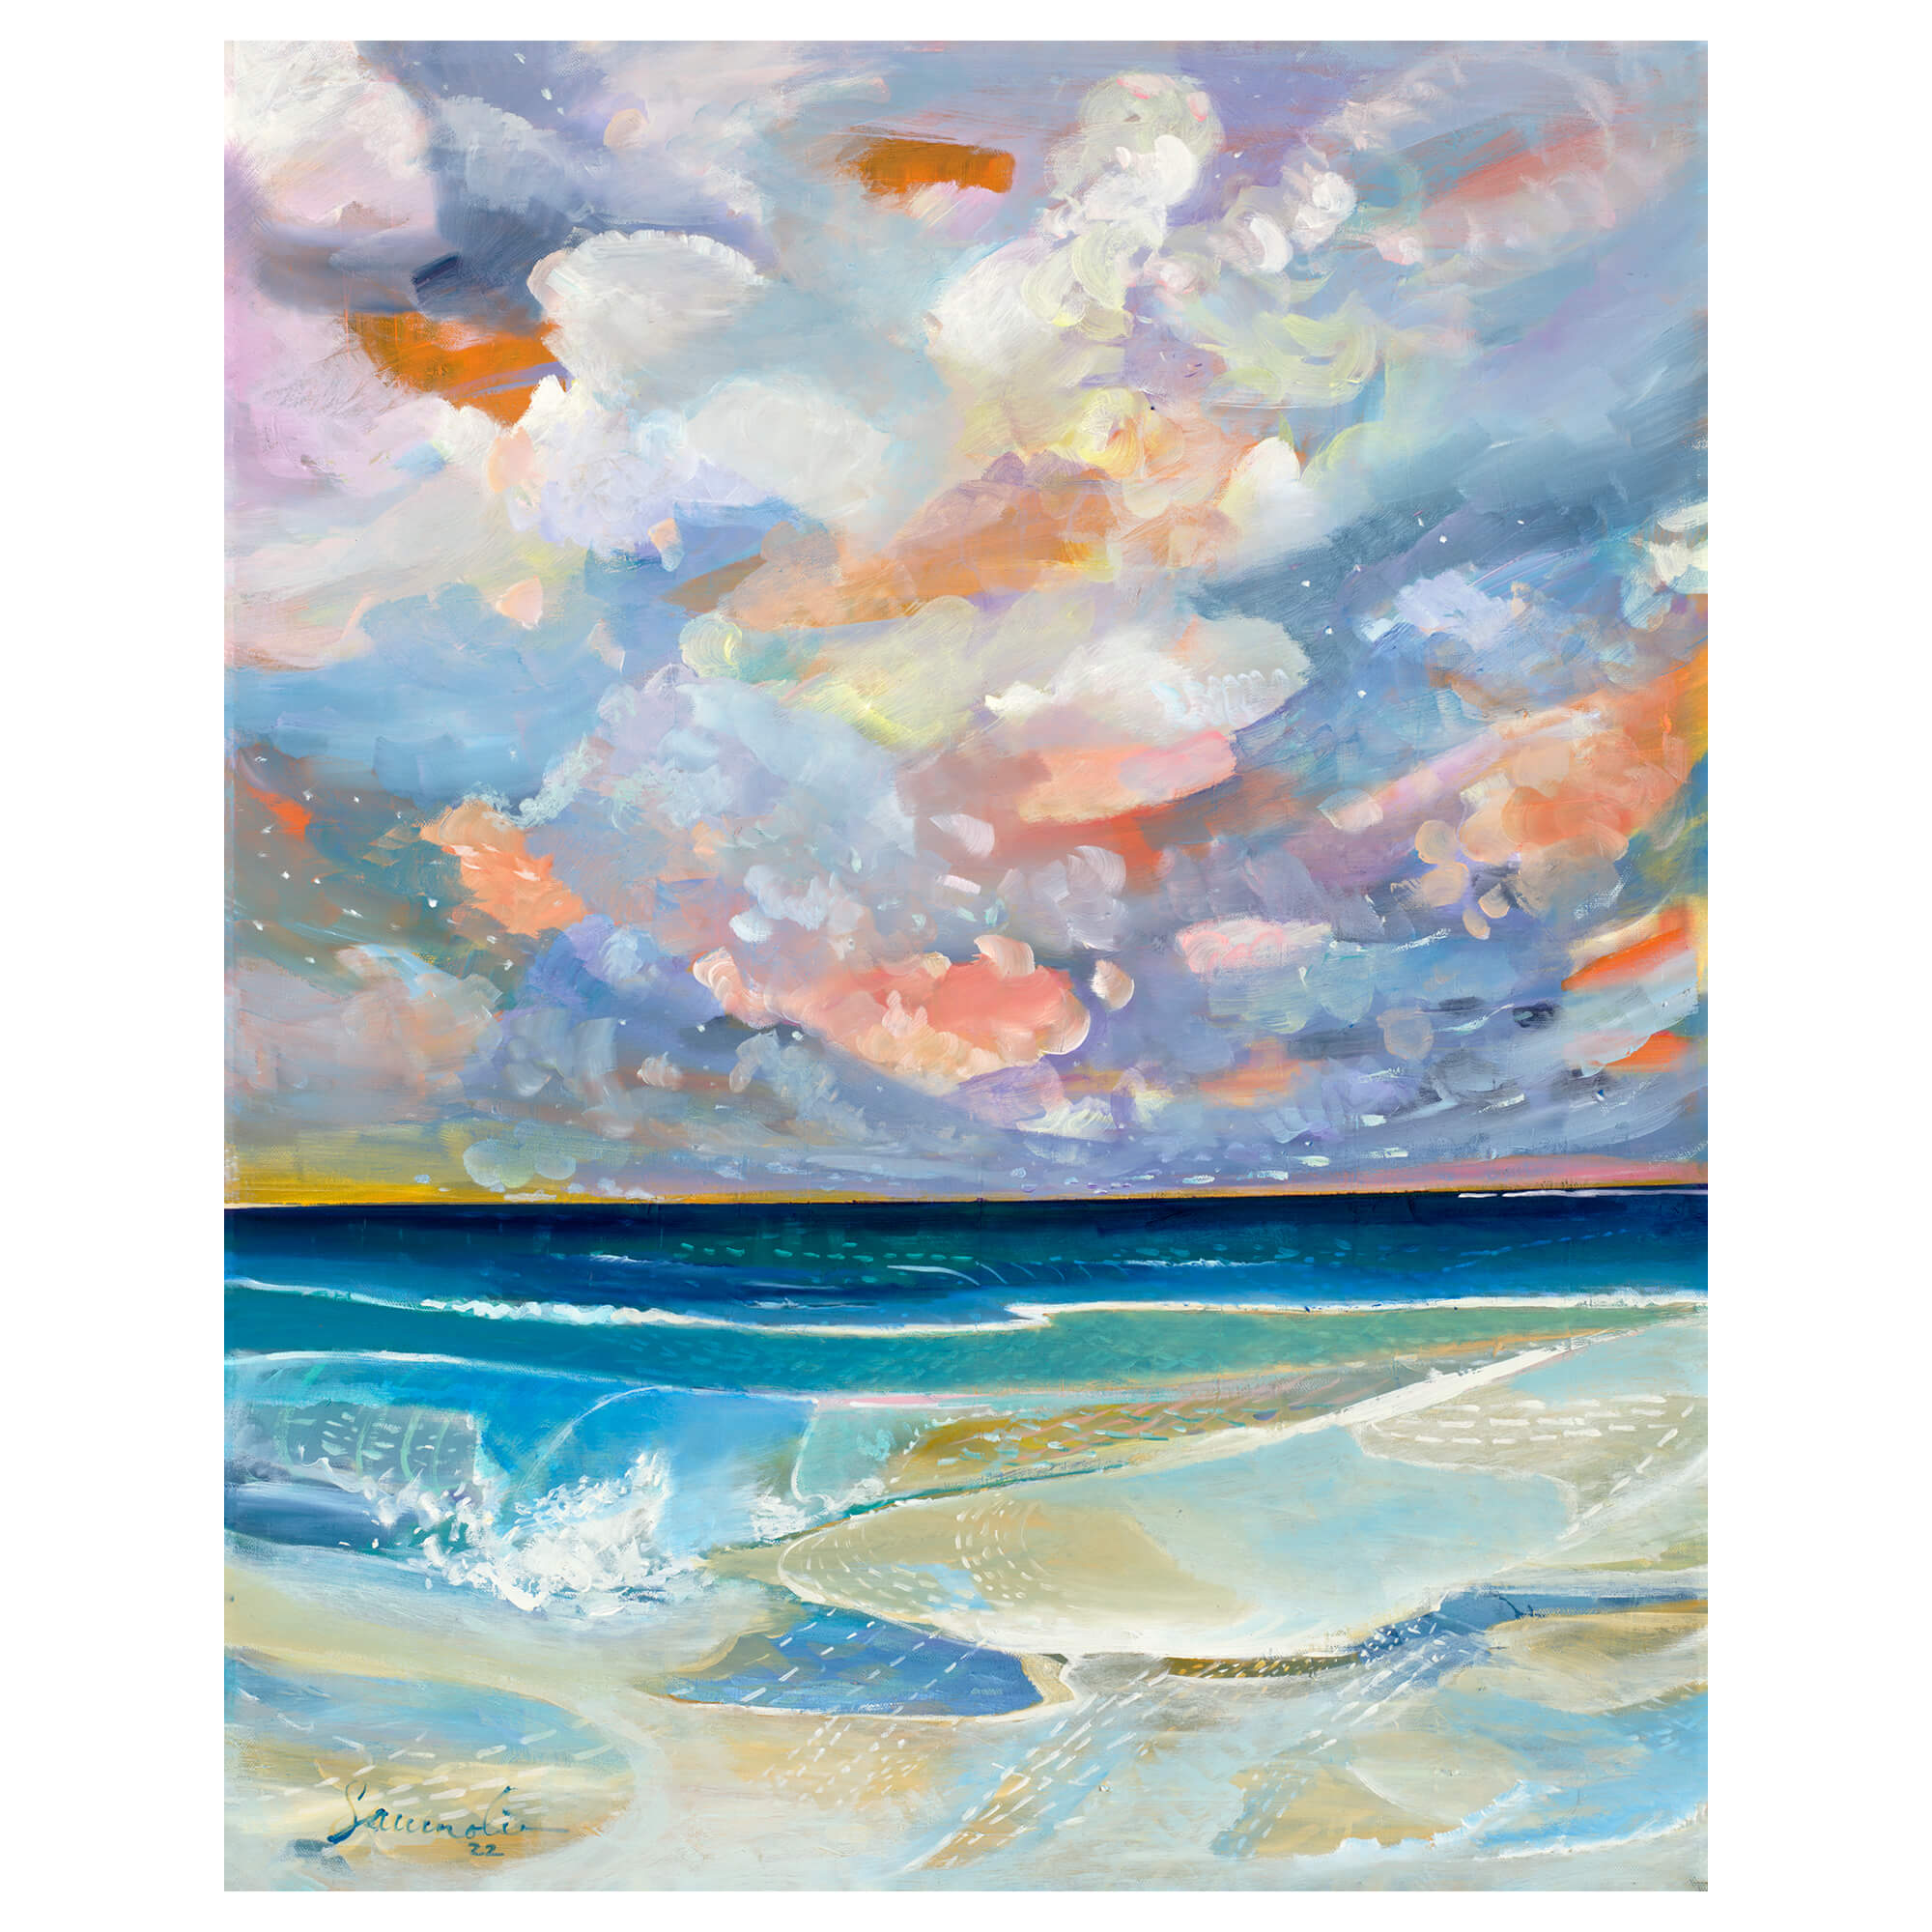  A matted art print featuring abstract teal and blue tinted waves crashing towards the shore by popular Hawaii artist Saumolia Puapuaga